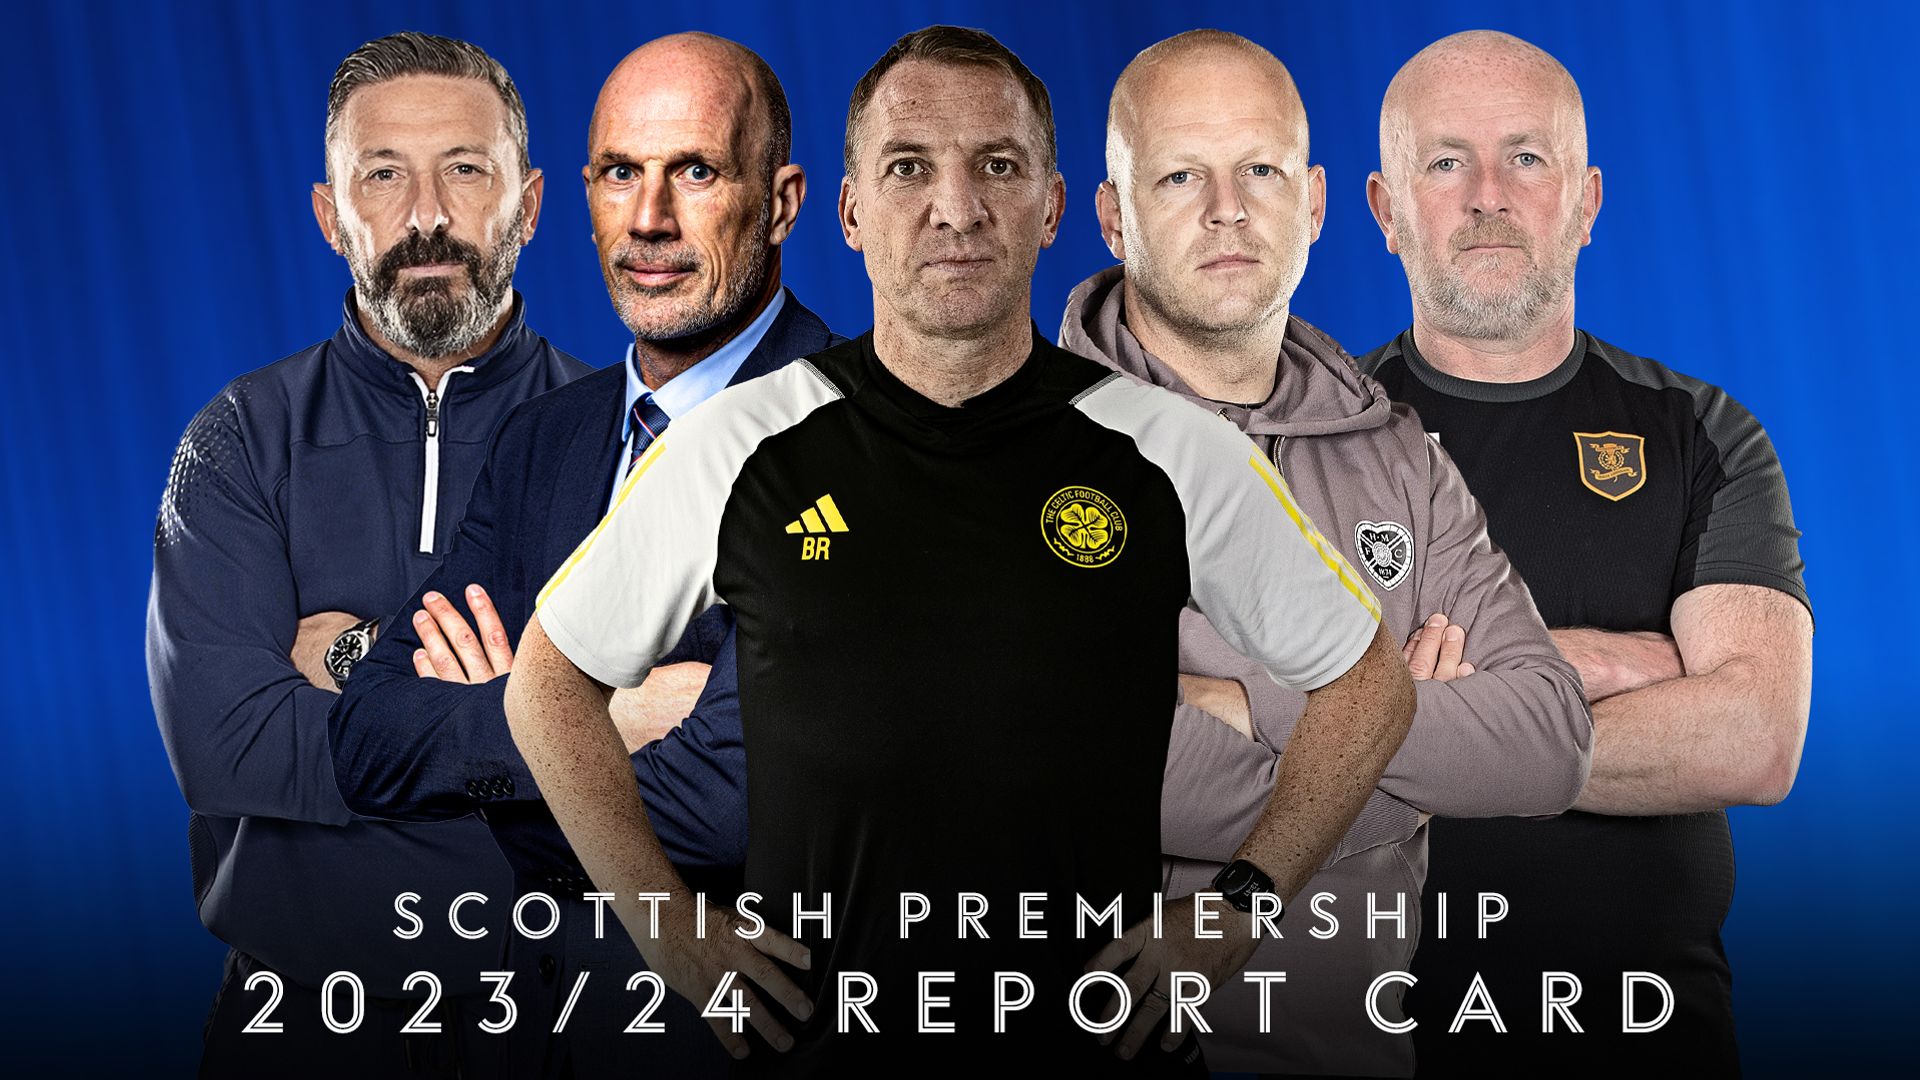 Scottish Premiership report card: How does your club rate?